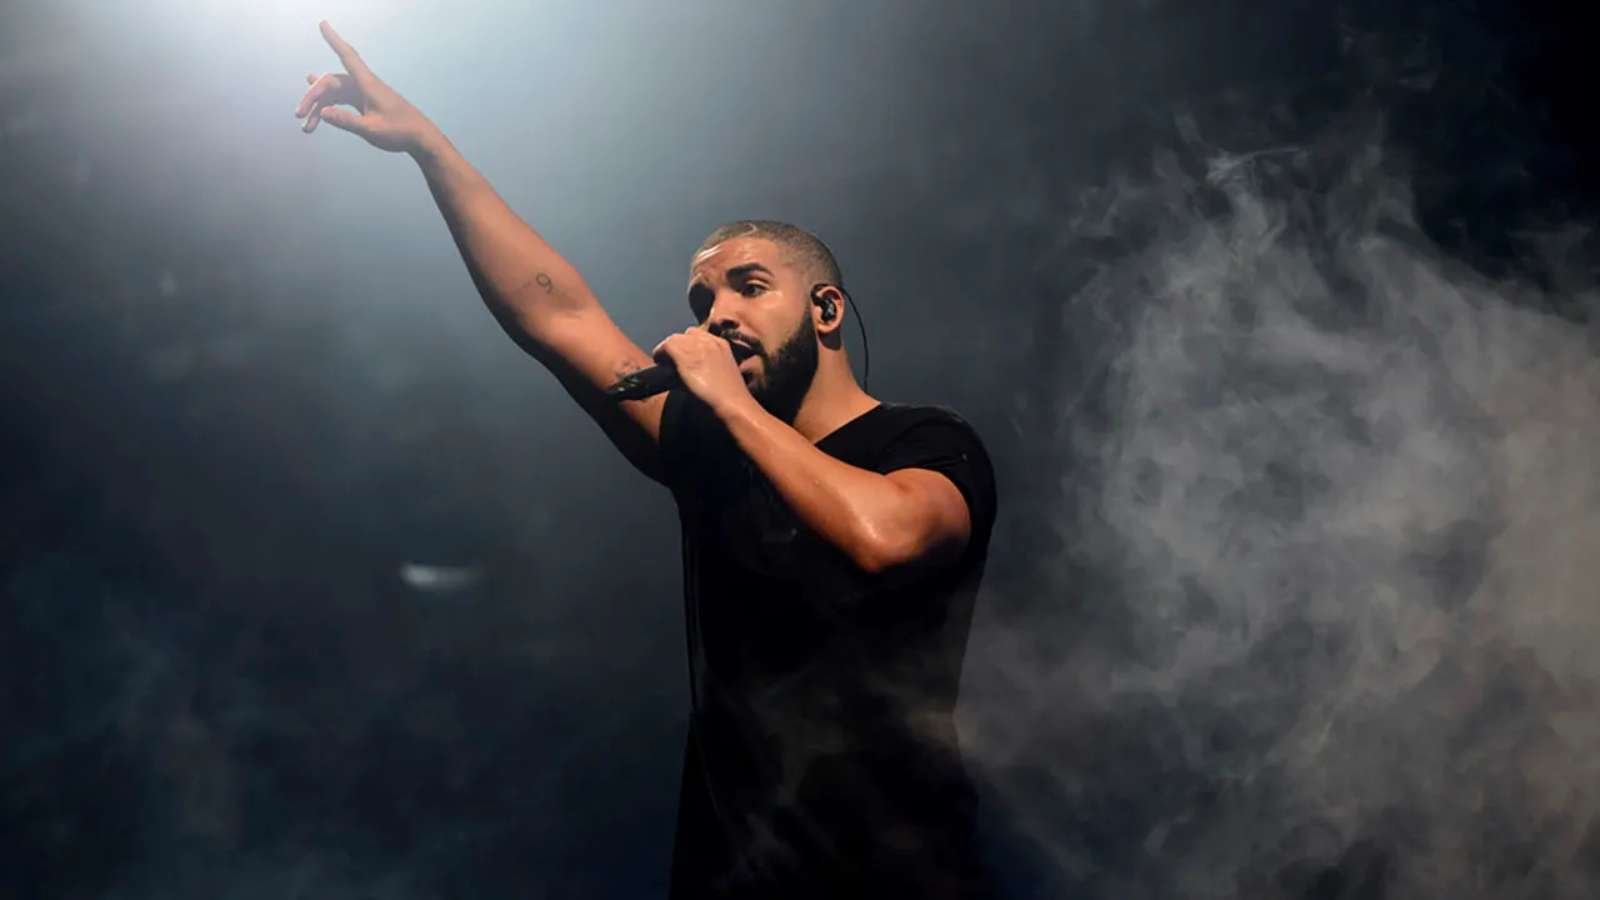 Drake Admits About Leaked Video in Shocking Mid-Concert Announcement